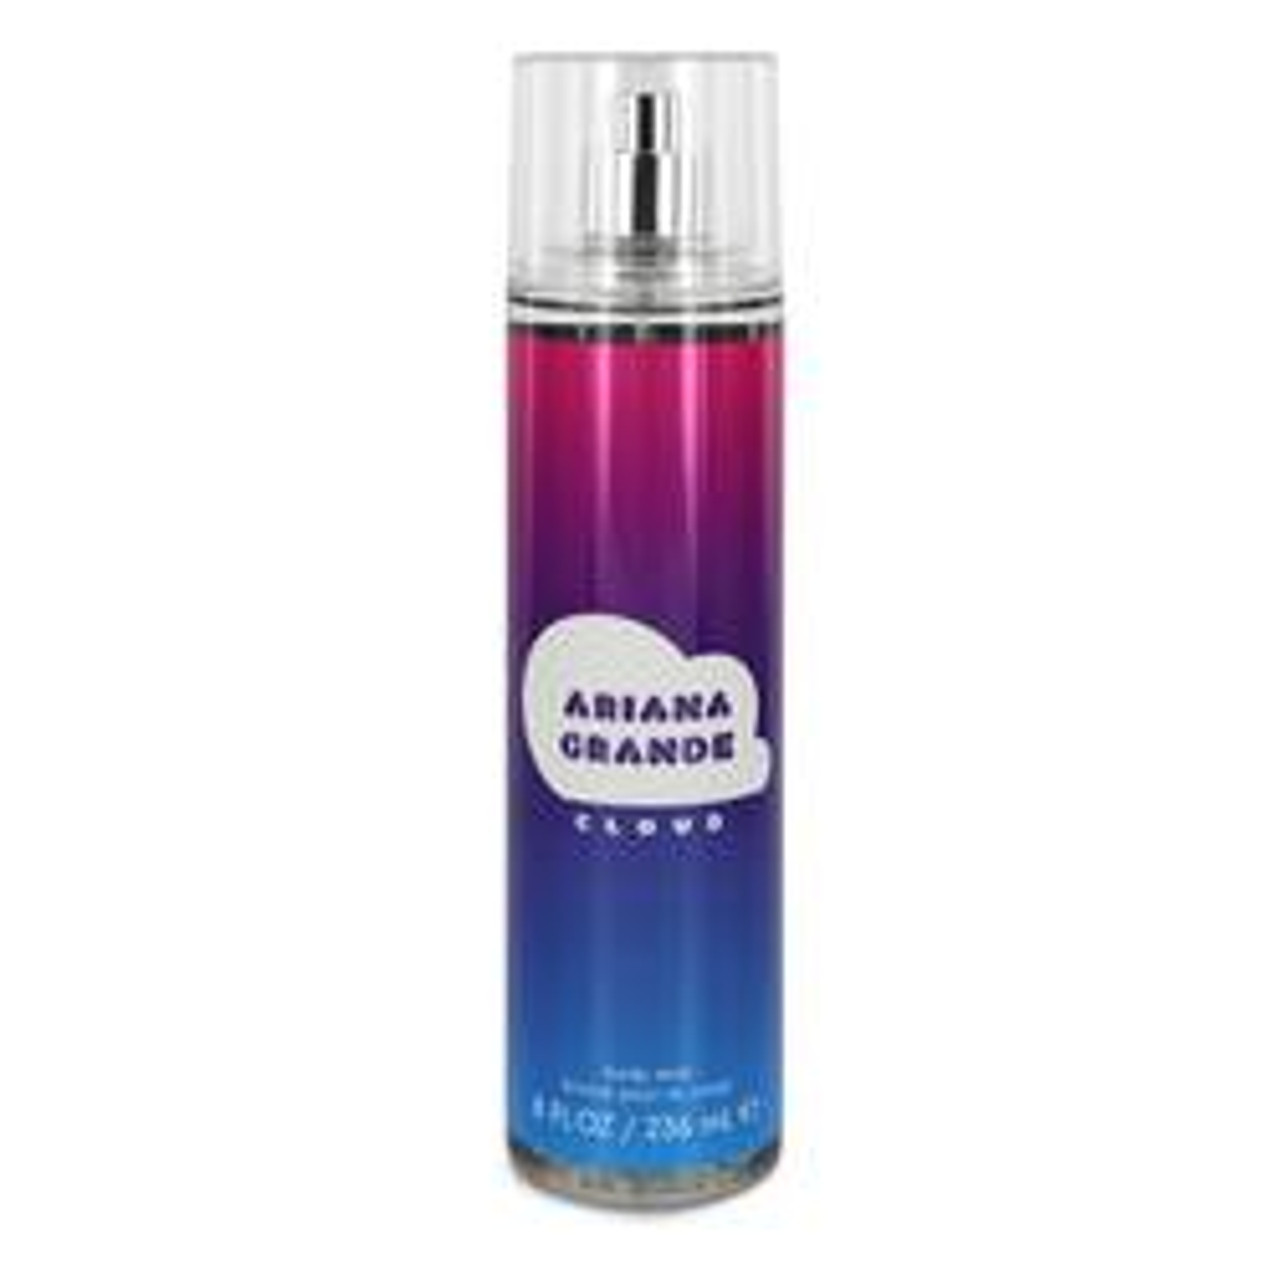 Ariana Grande Cloud Perfume By Ariana Grande Body Mist 8 oz for Women - [From 76.00 - Choose pk Qty ] - *Ships from Miami